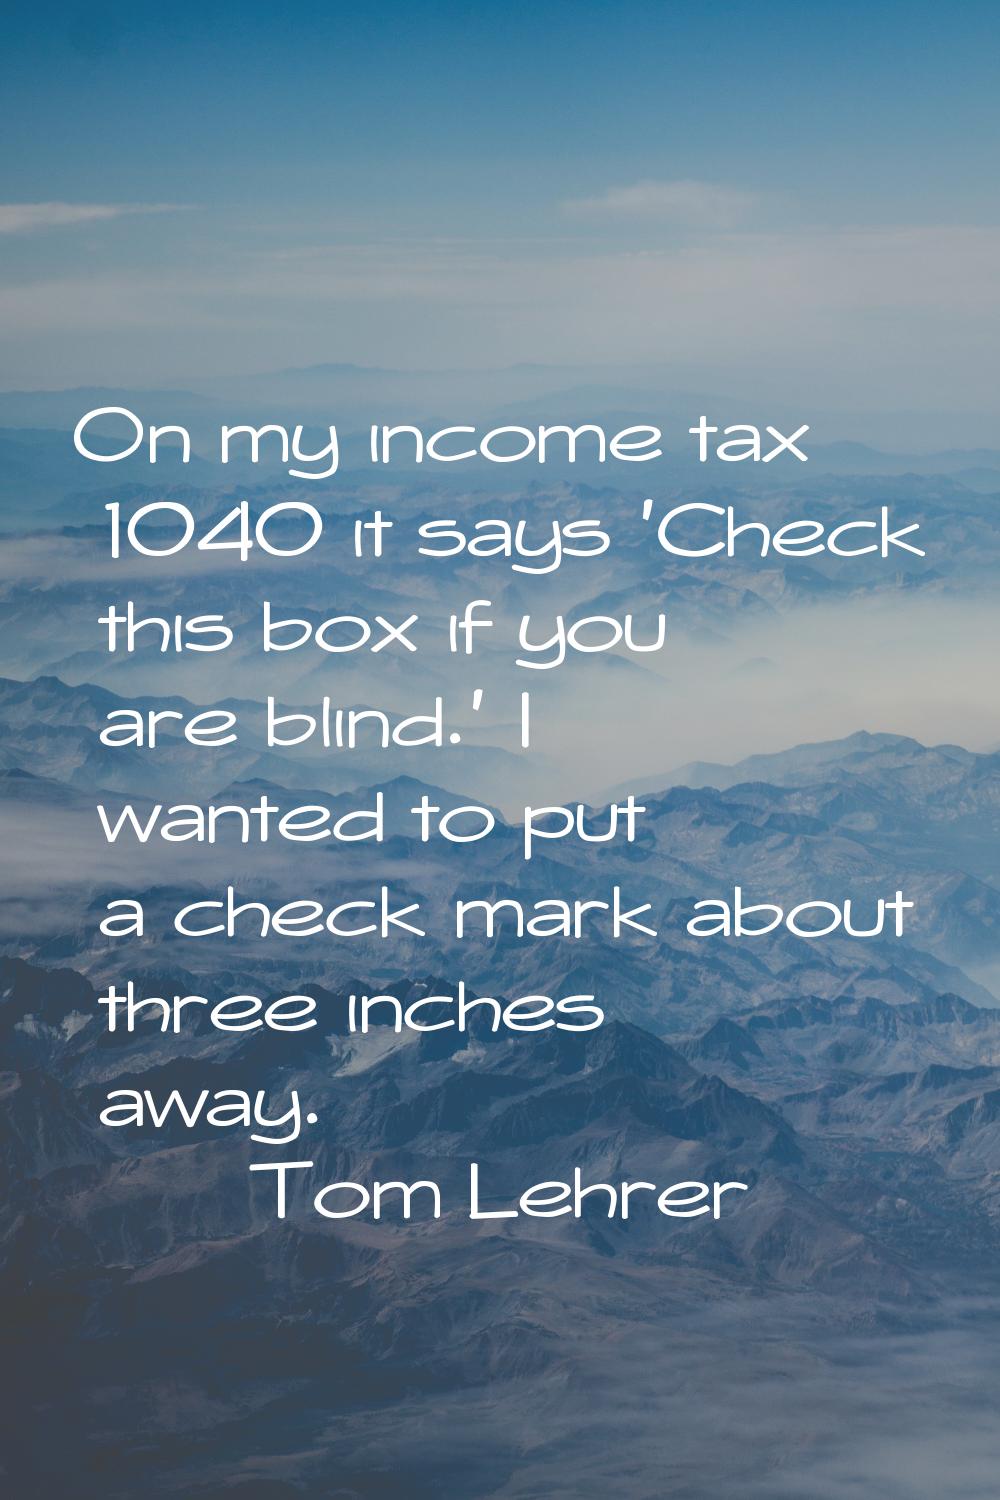 On my income tax 1040 it says 'Check this box if you are blind.' I wanted to put a check mark about